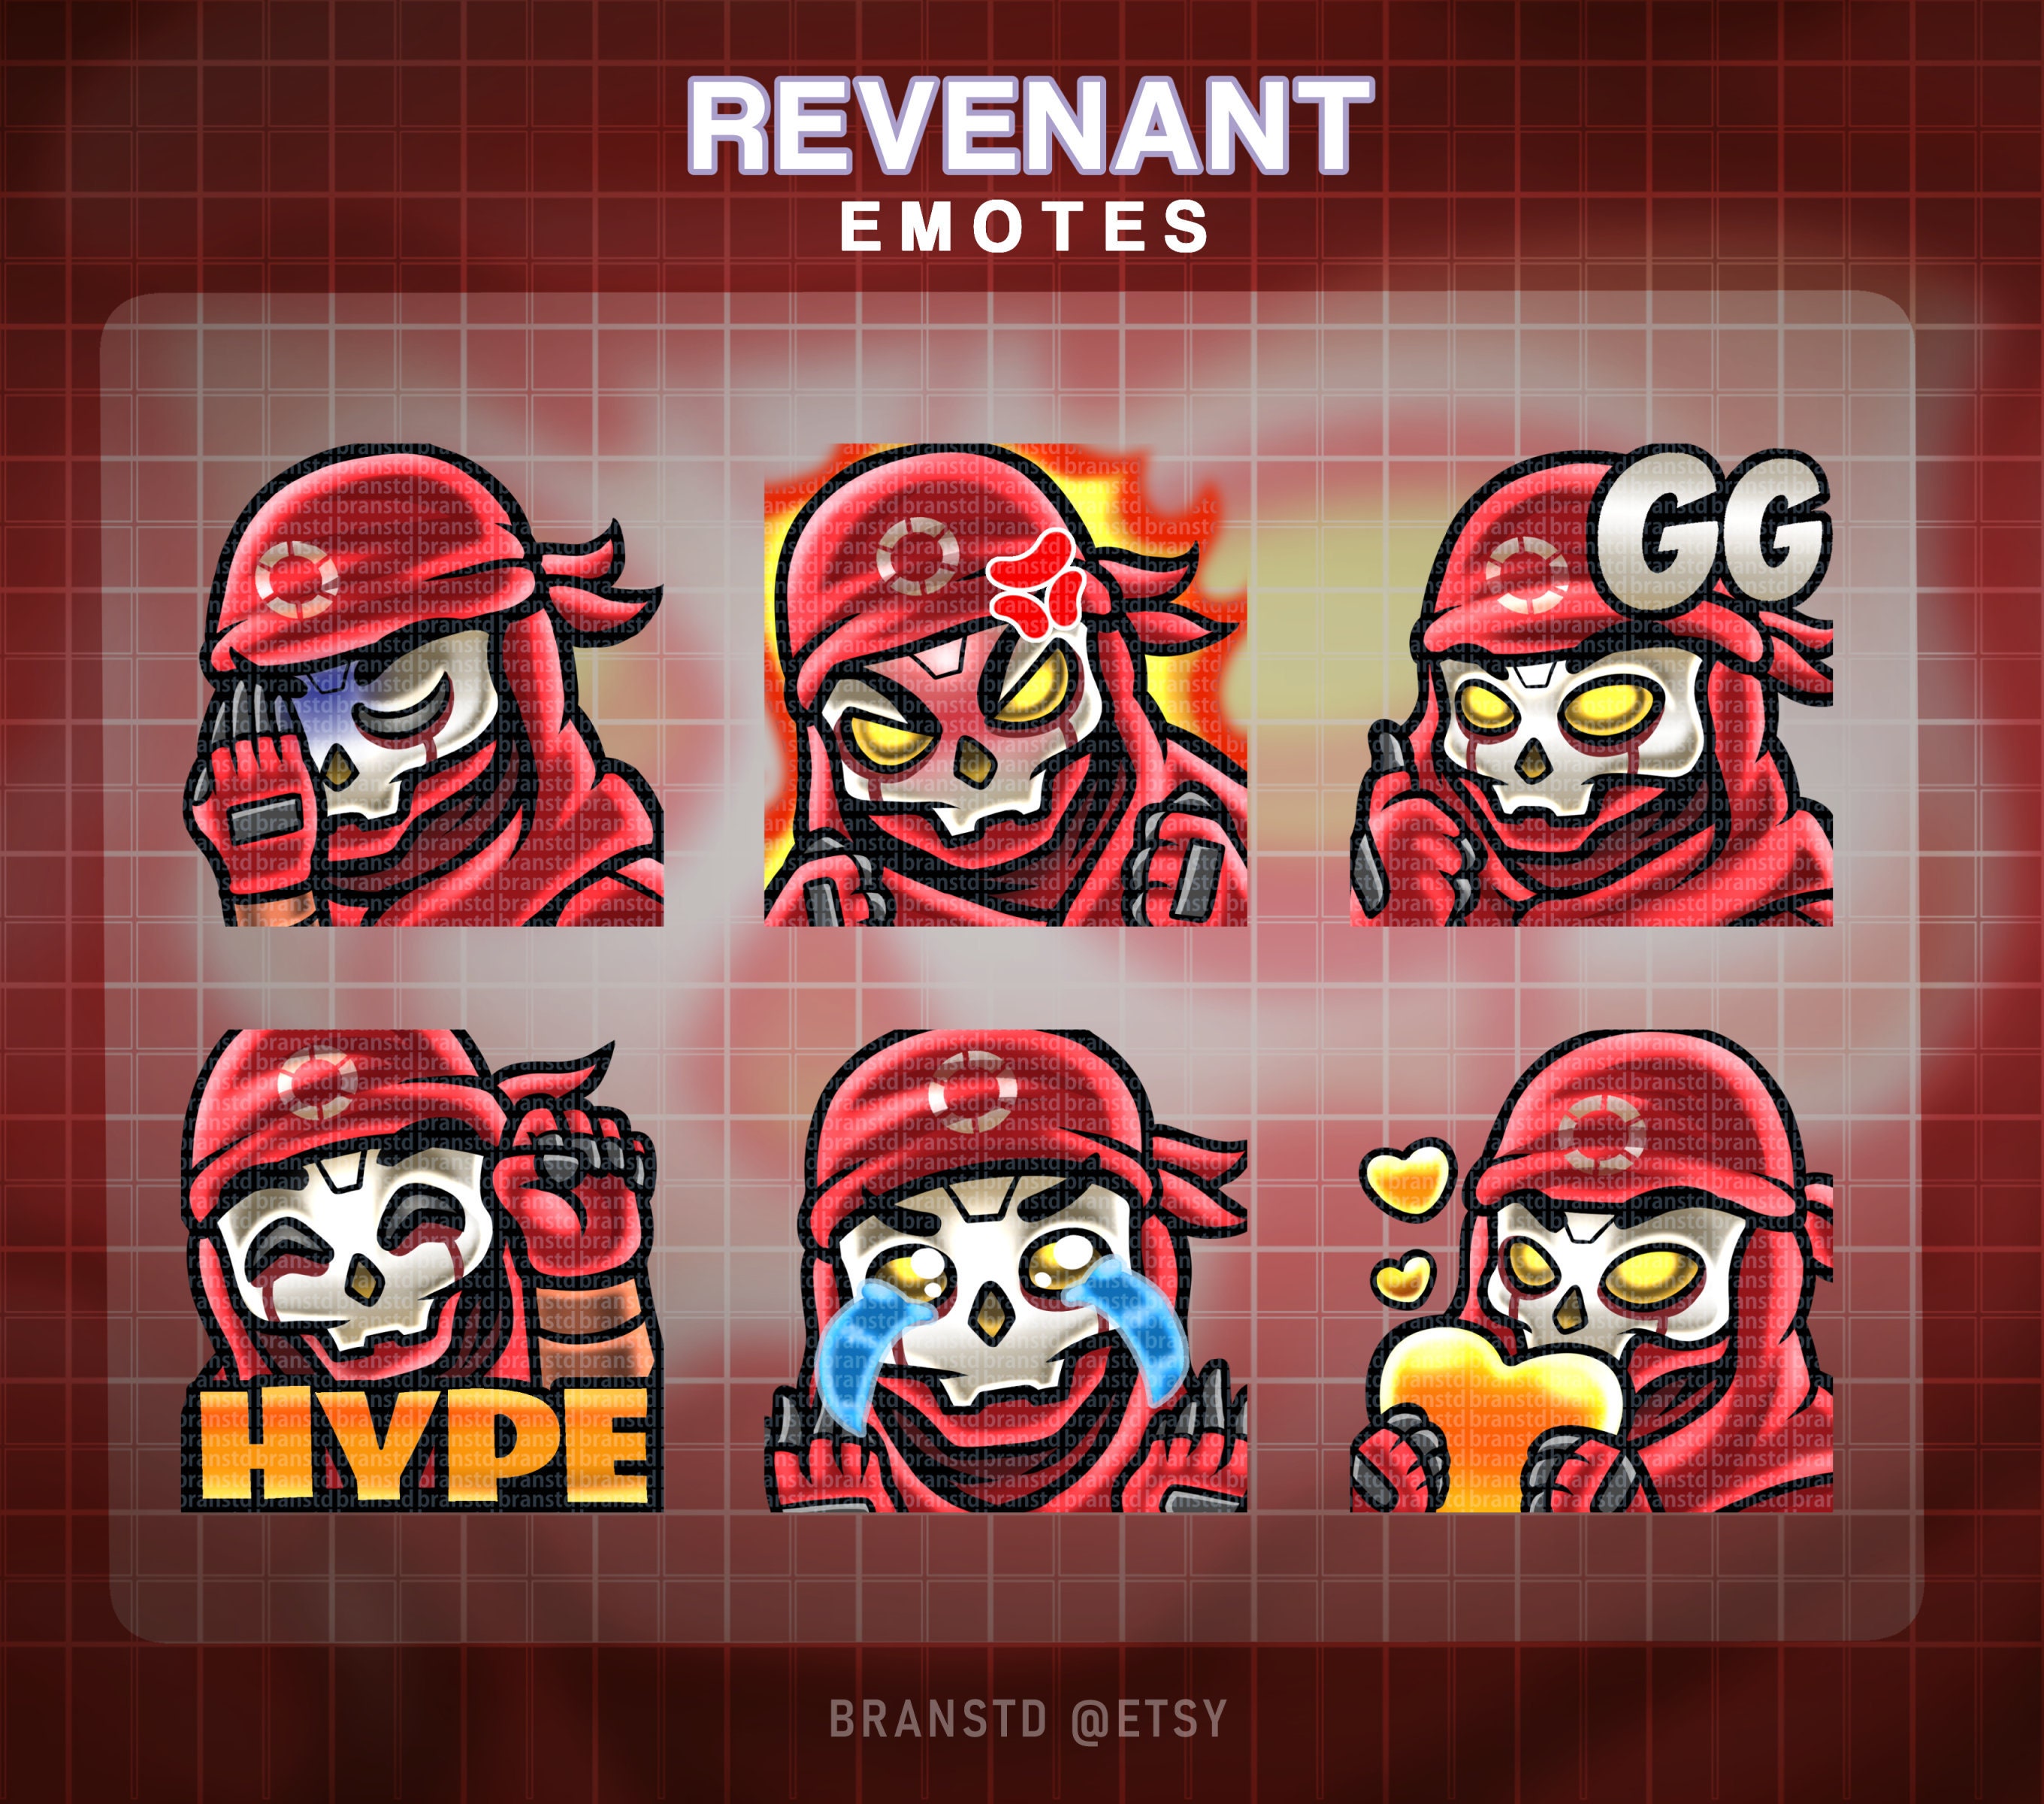 6x Revenant apex legends emotes for Twitch, Discord, Mixer or Youtube Inclu...